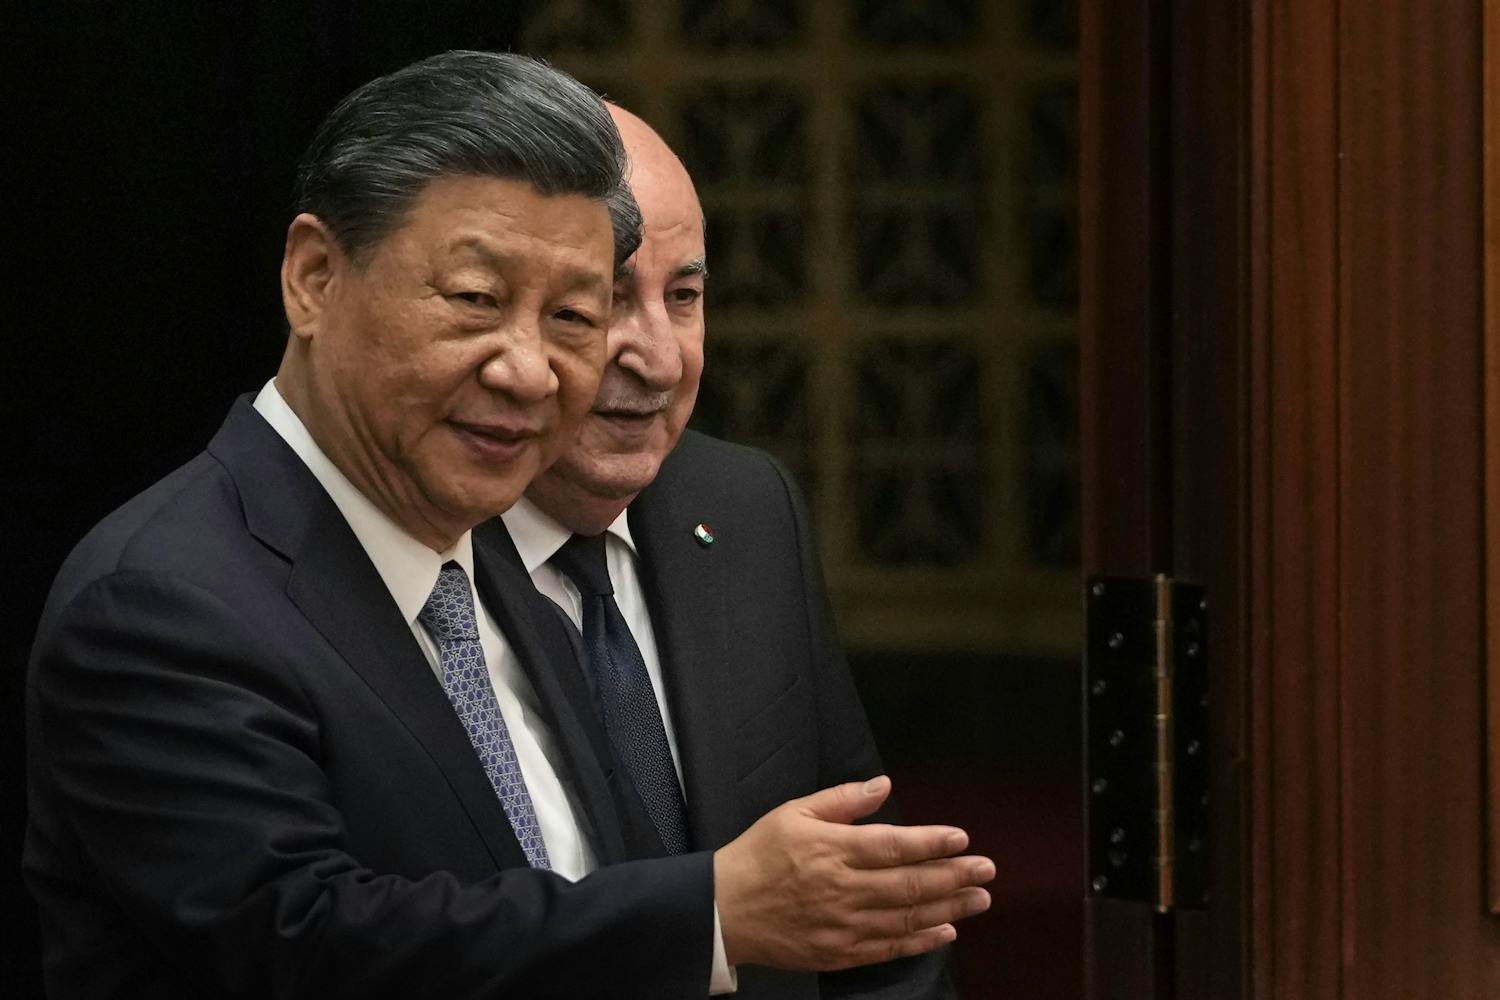 The European Central Bank is committing a fallacy, and China is in deeper trouble